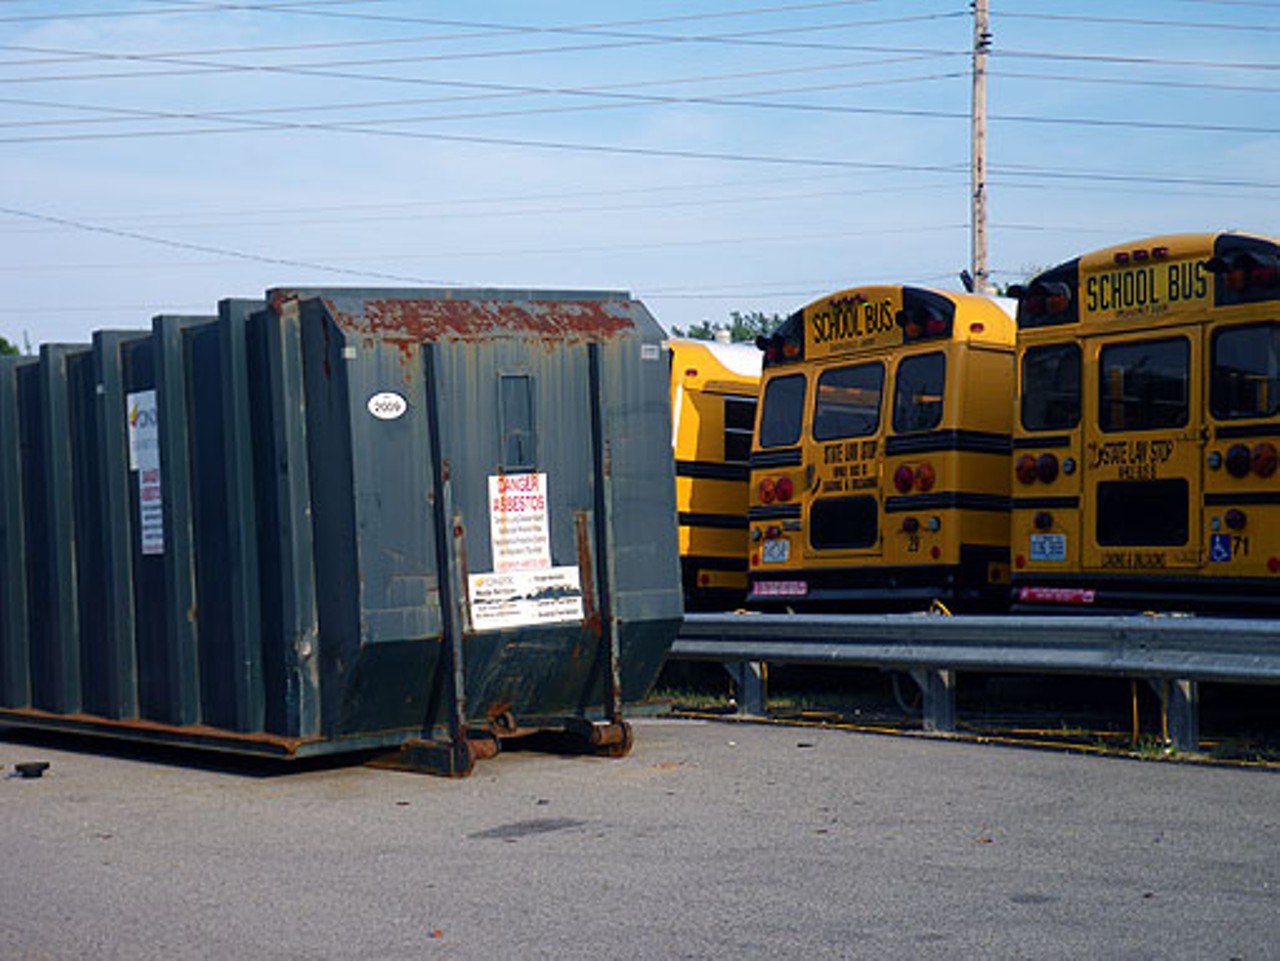 The presence of asbestos in a container on school property alarmed Green Trails residents.